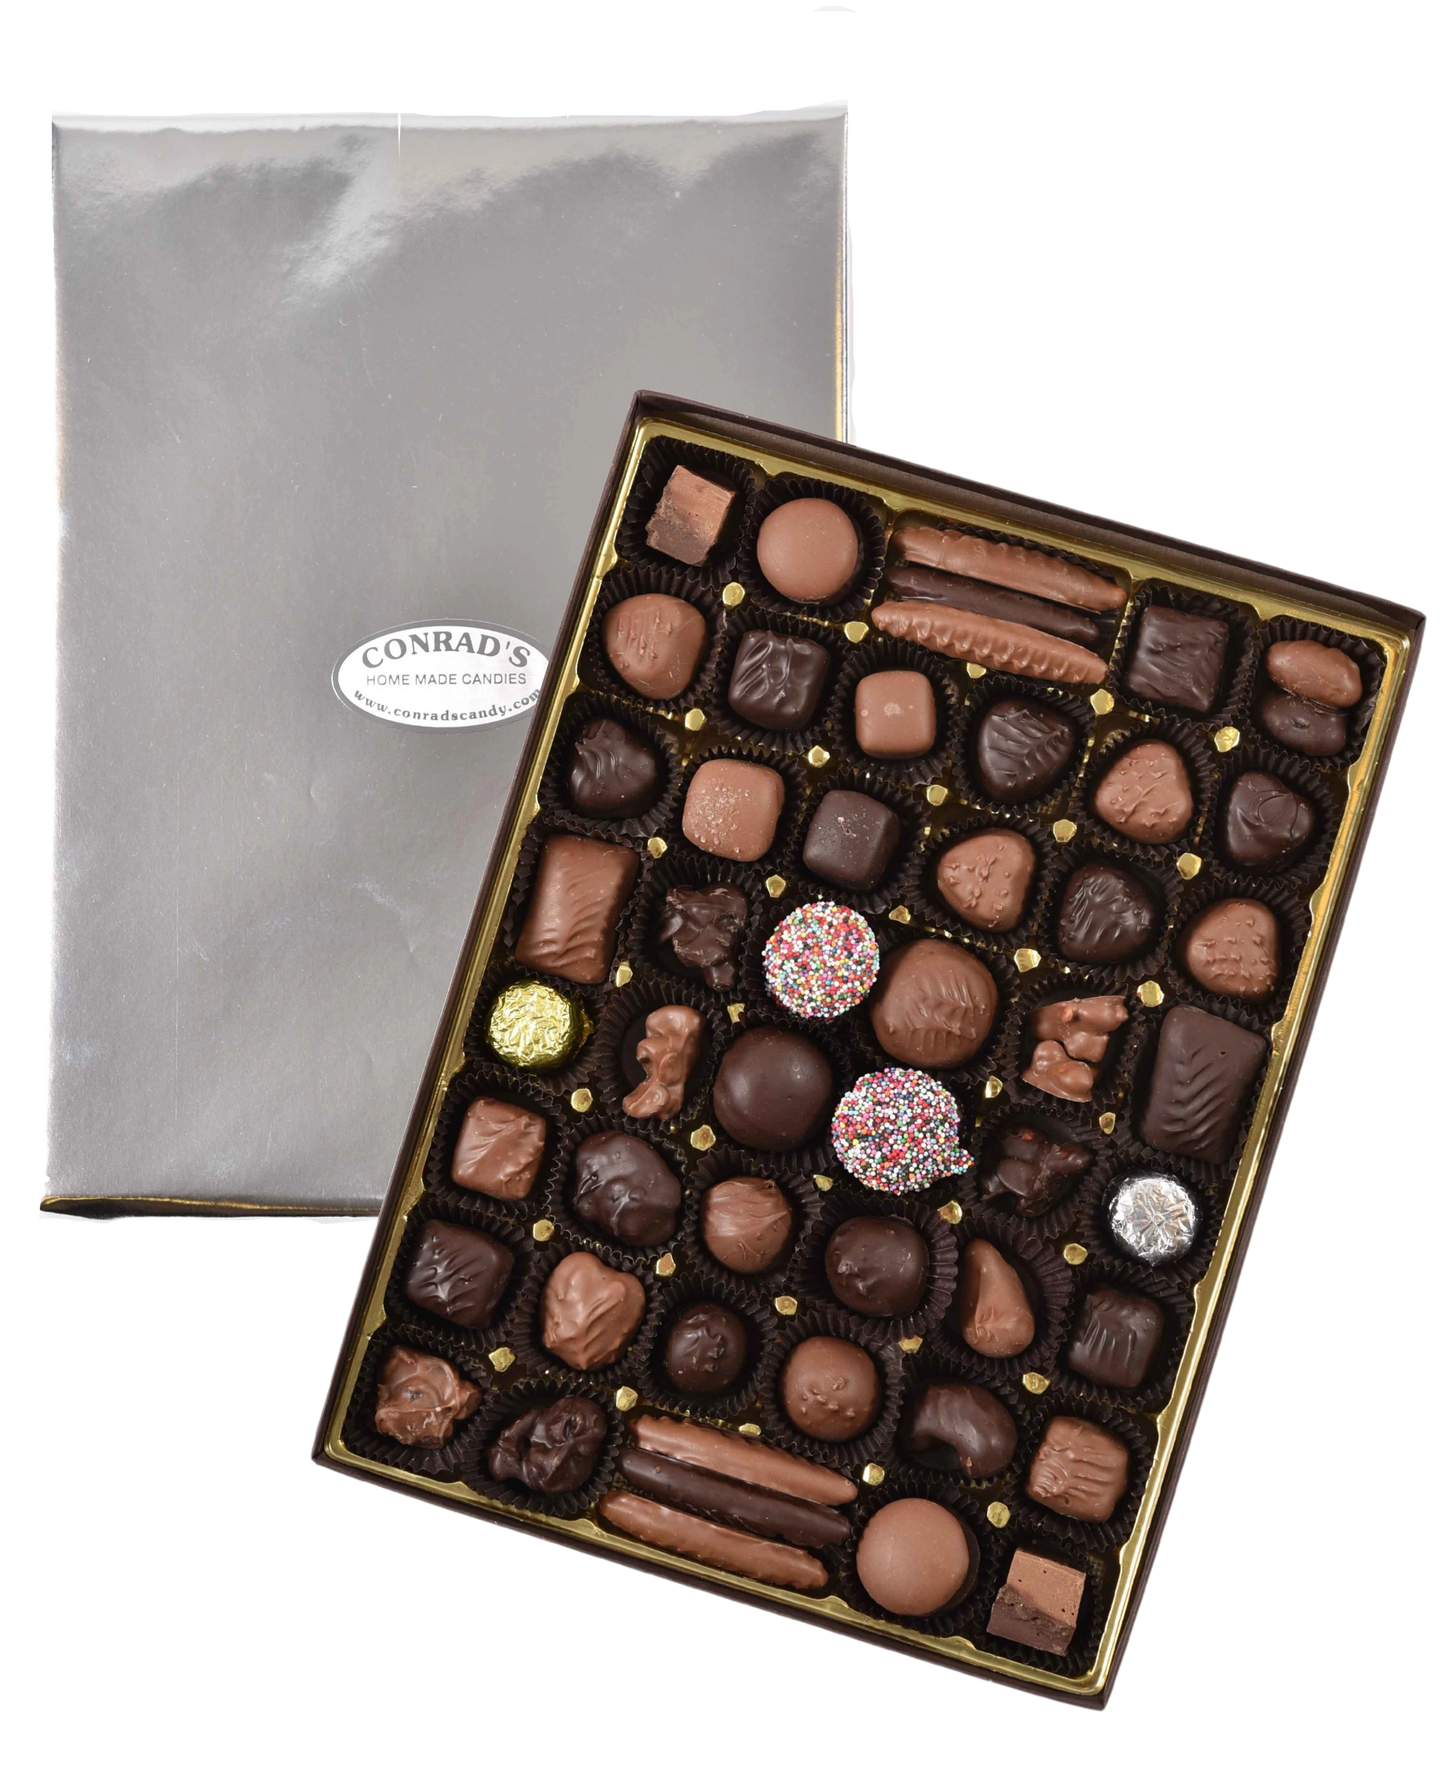 Large assortment of our favorite chocolates